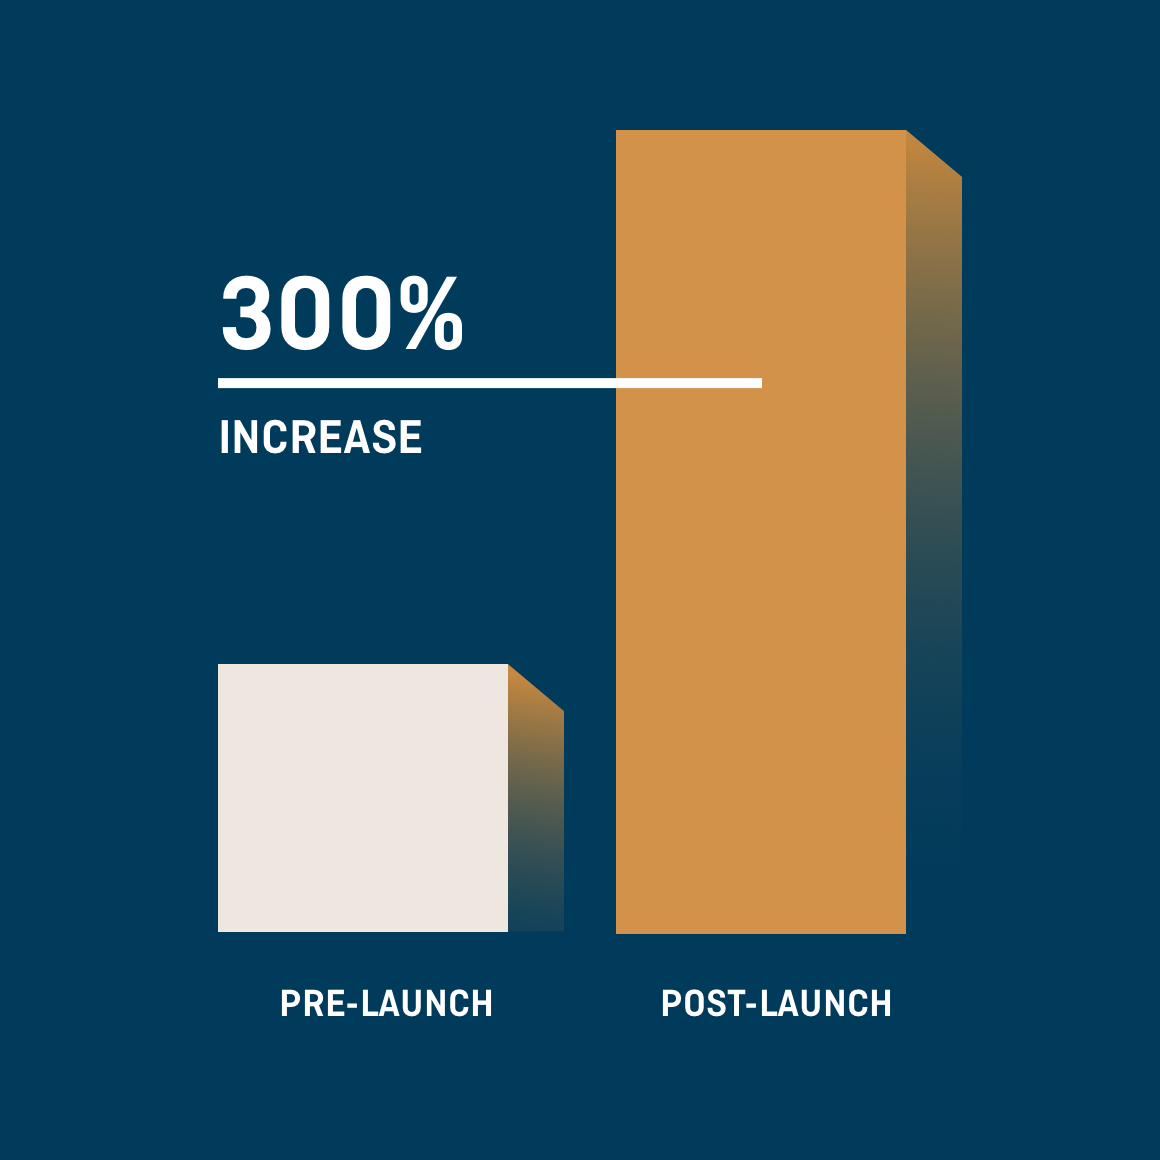 Bar graph depicting 300% increase in traffic to app store post-launch